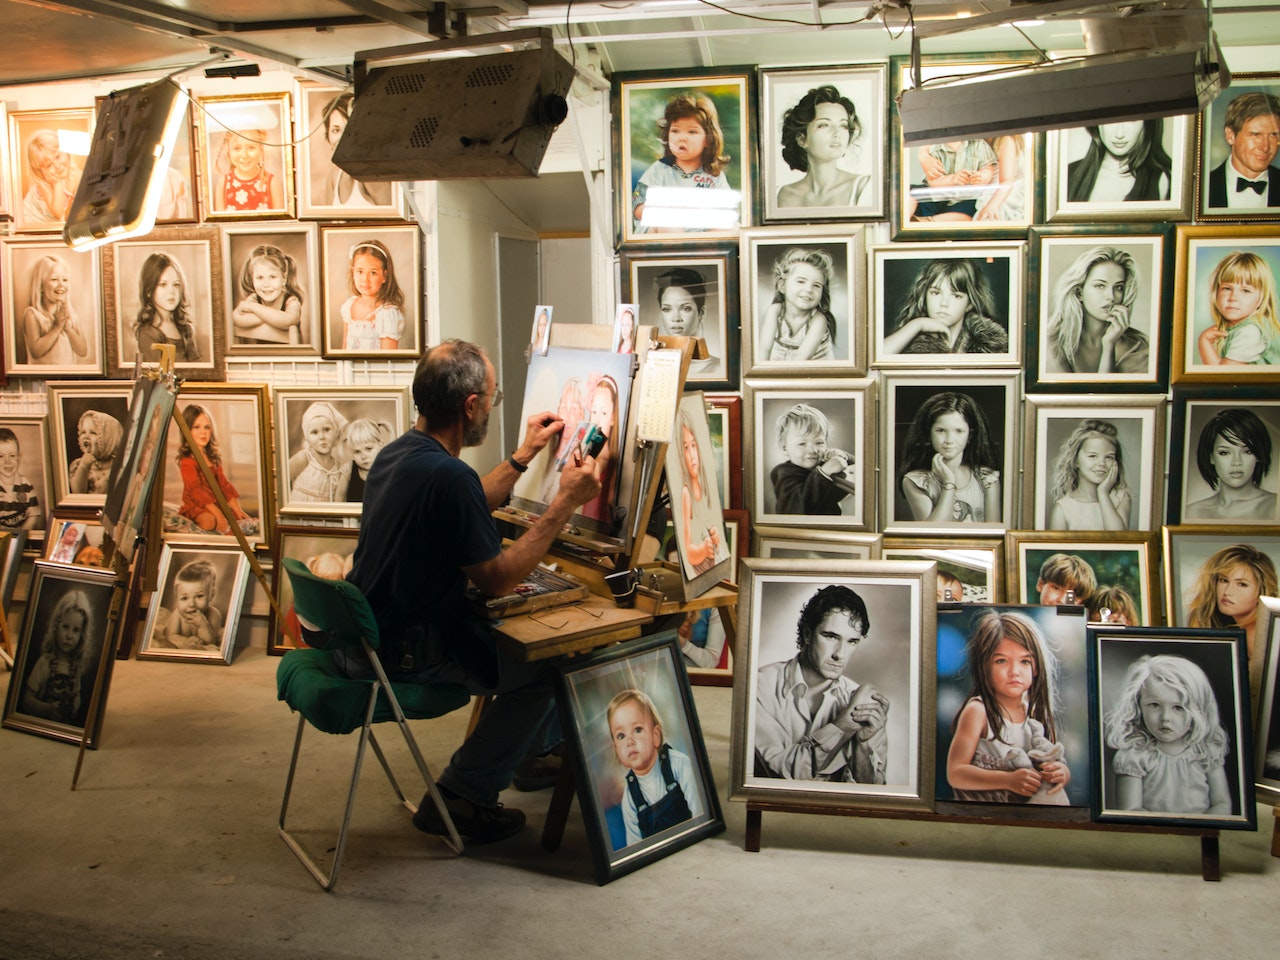 A man painting in his gallery